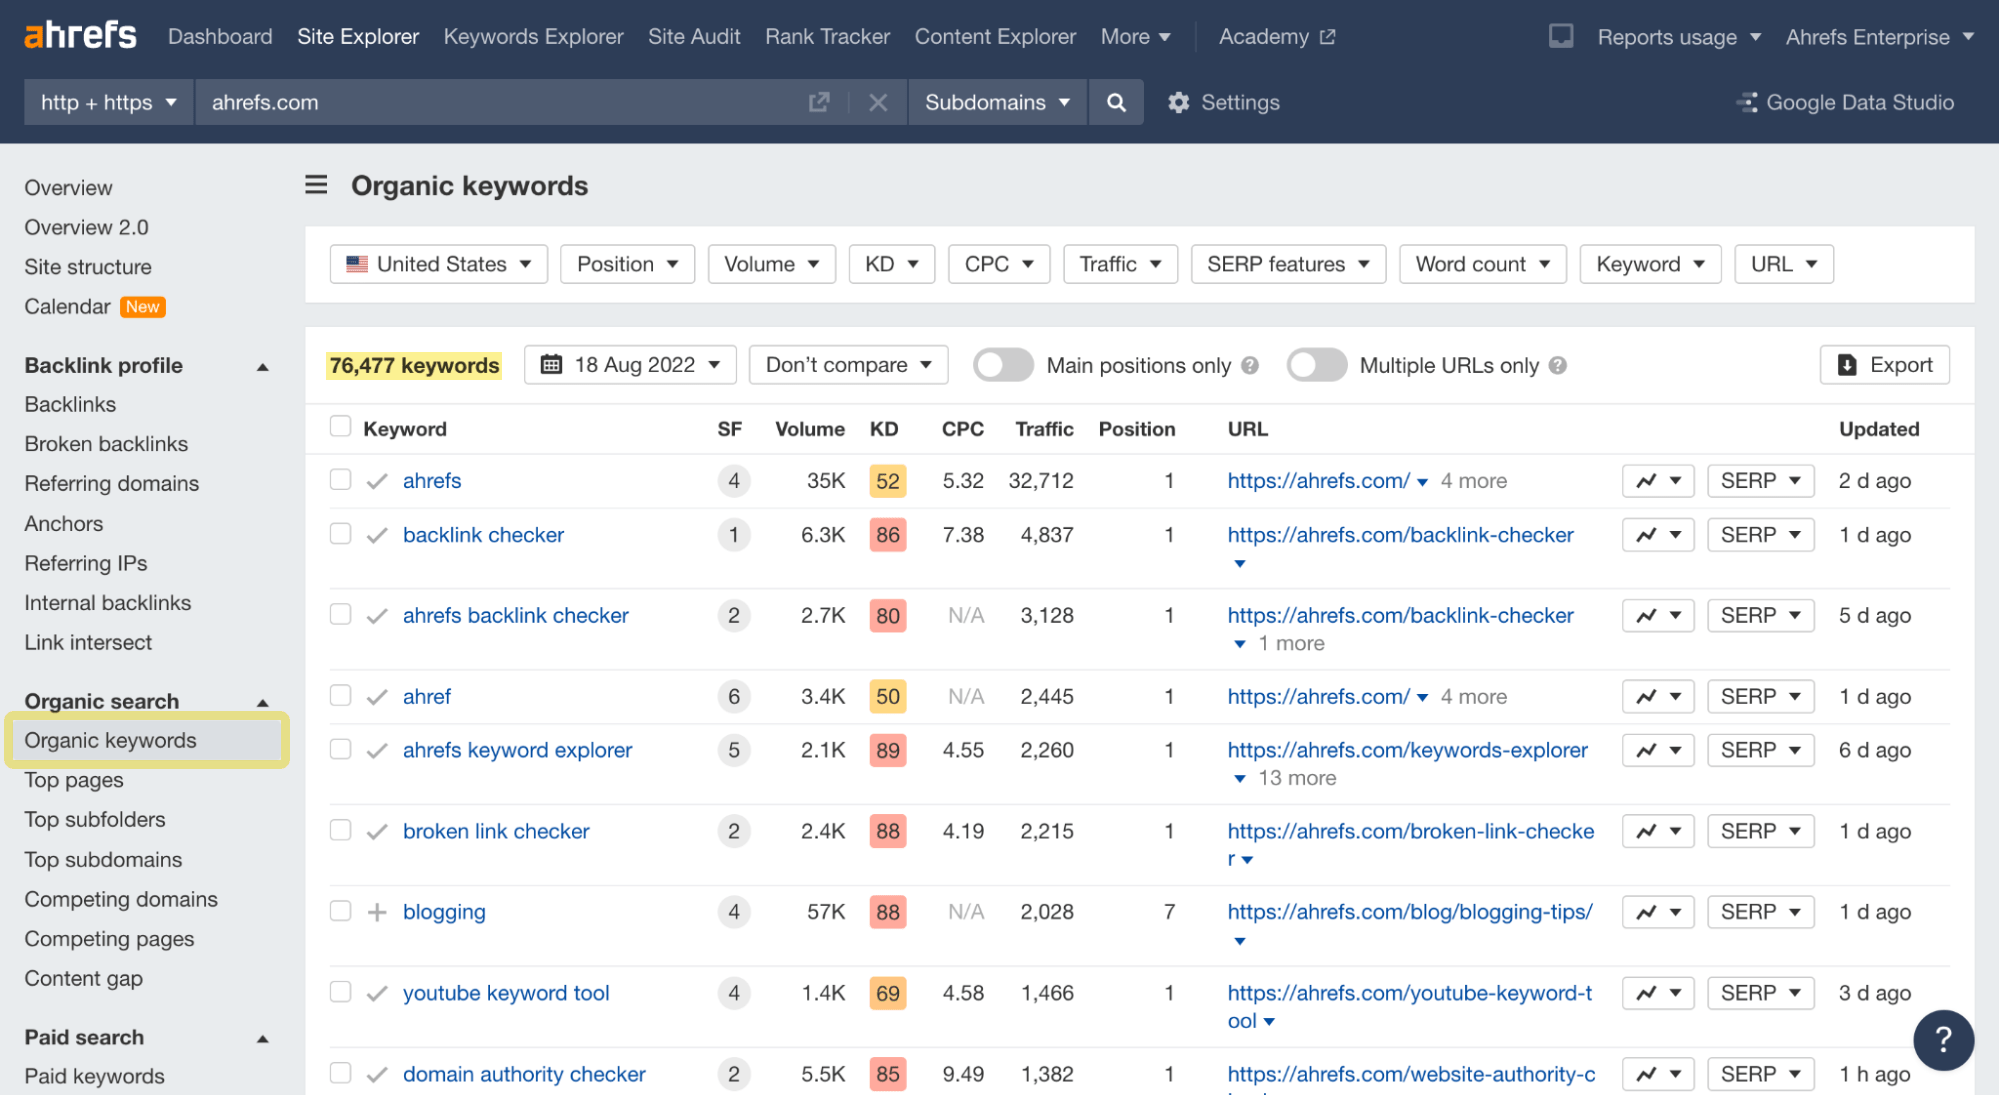 Finding any website's organic keywords with Ahrefs' Site Explorer